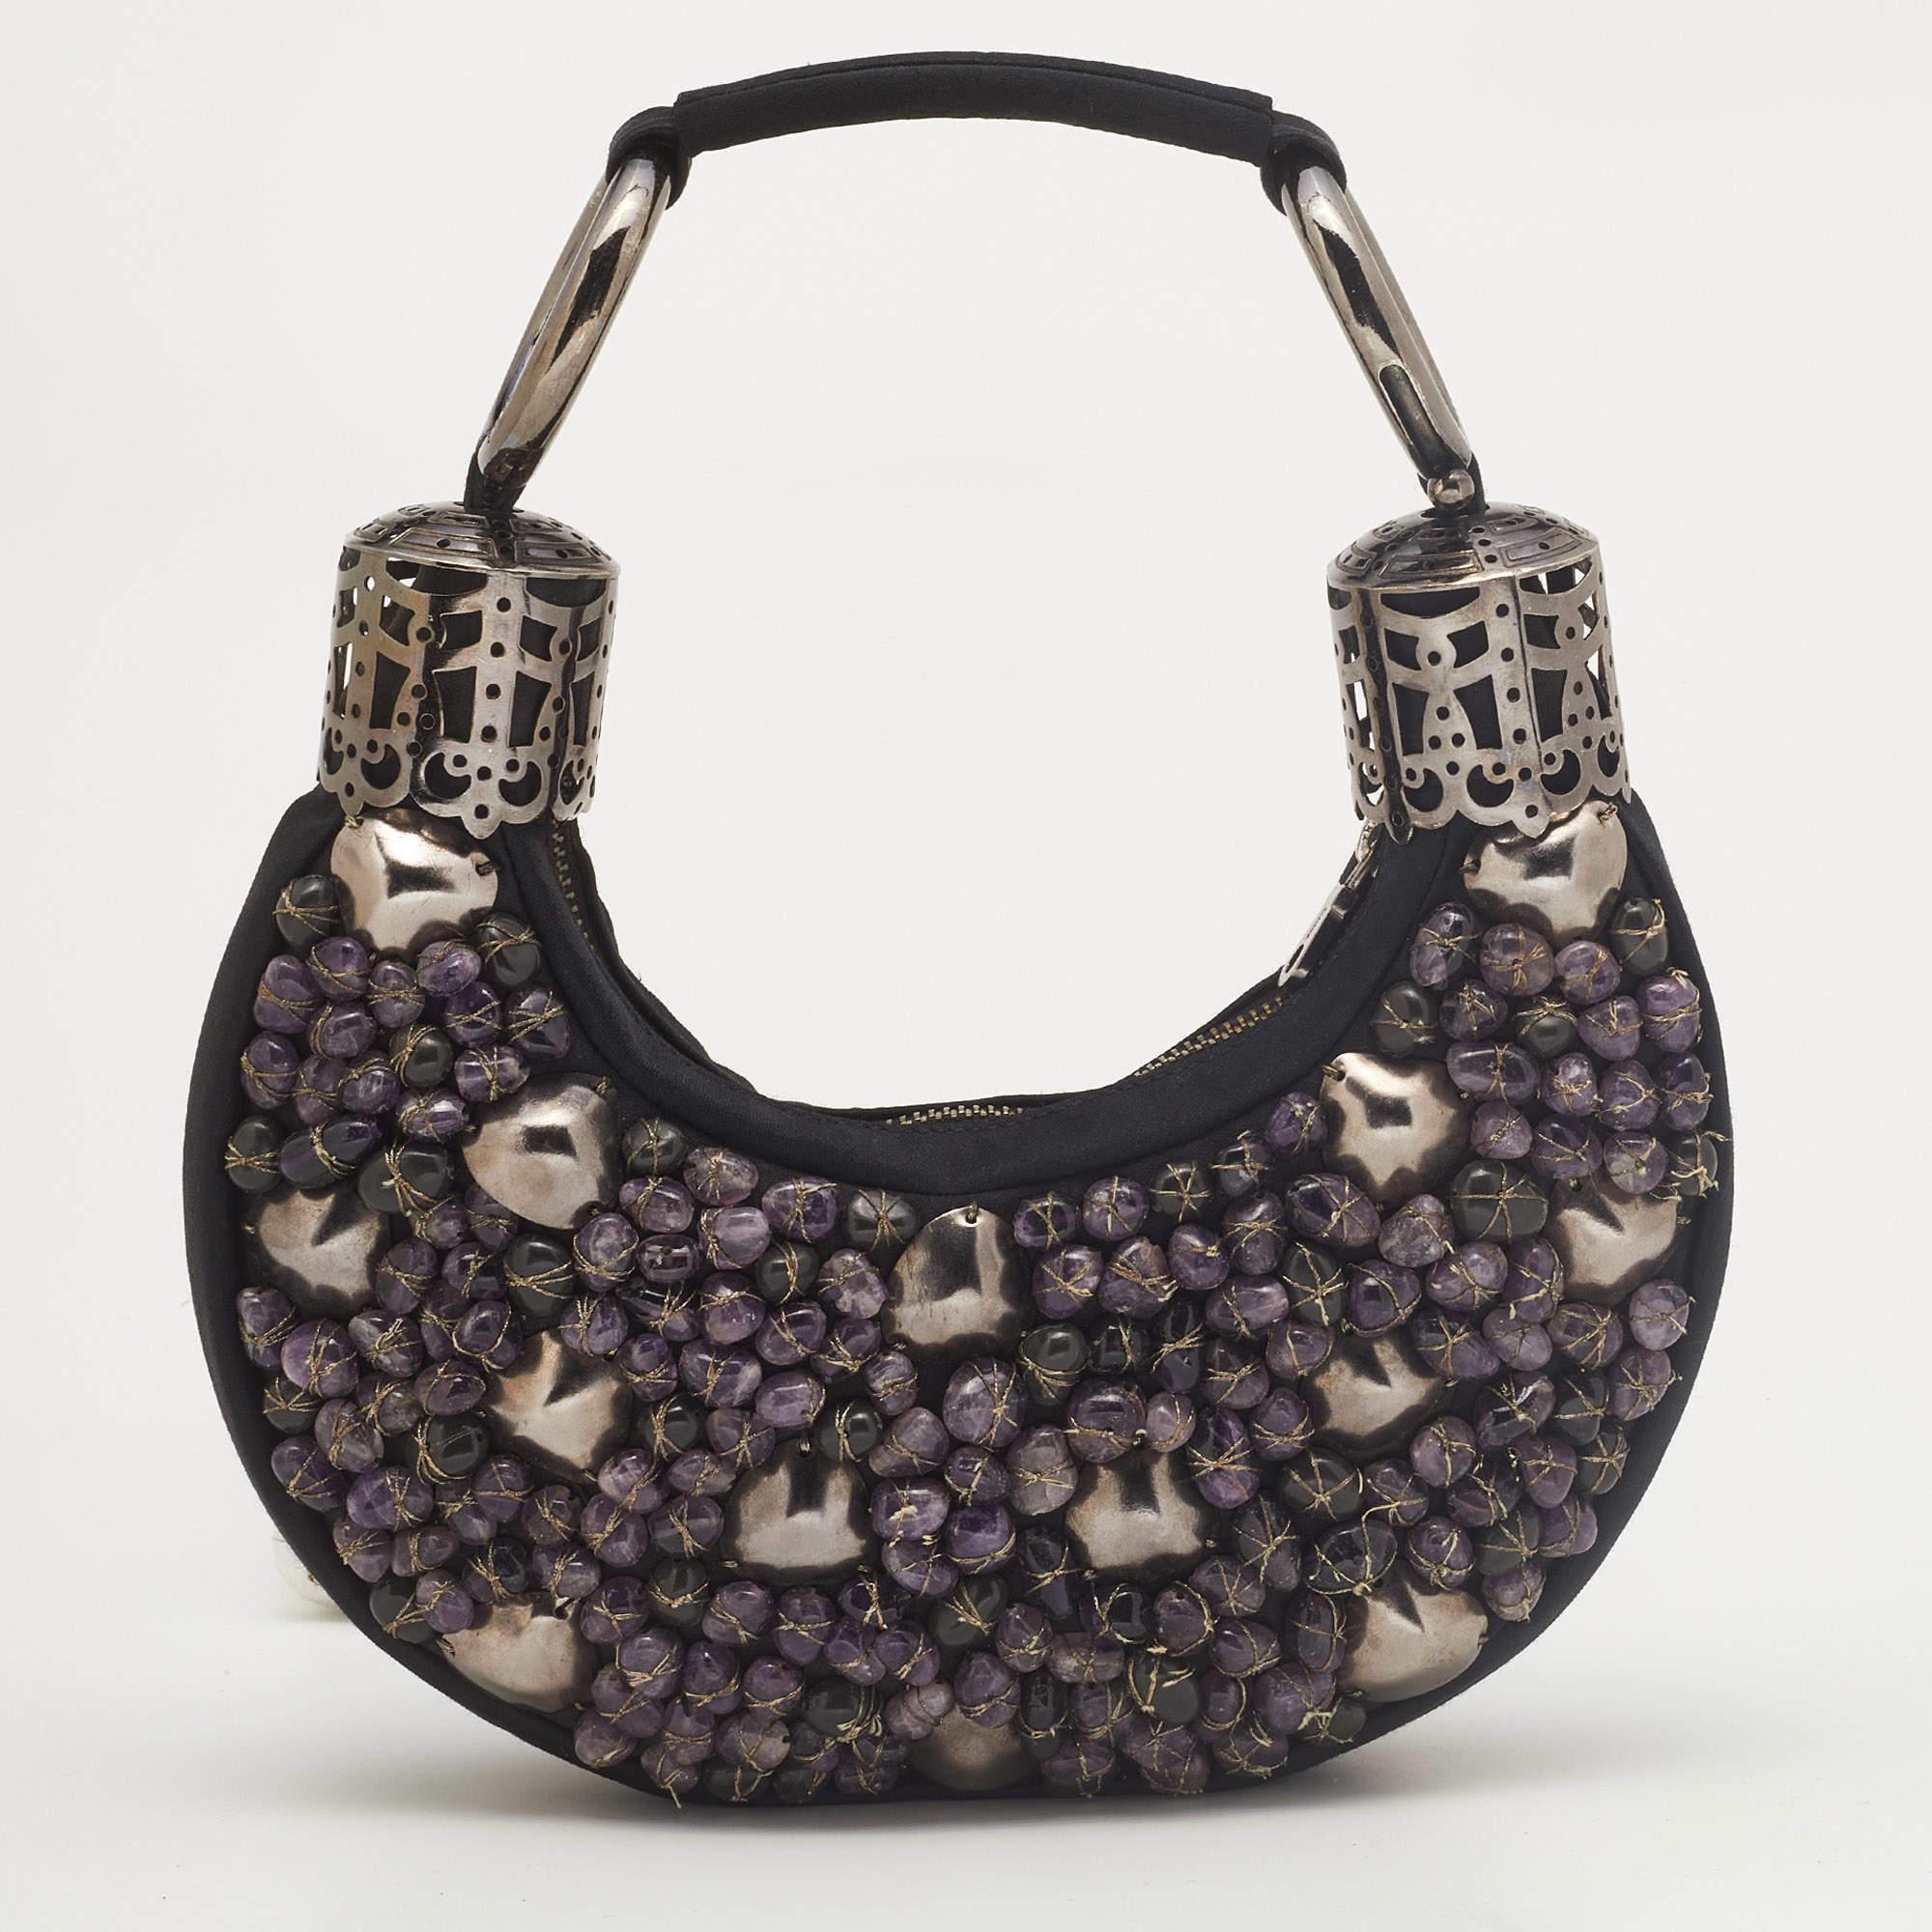 This Chloe design has a black satin exterior with an embellishment of beads and stones. The hobo carries a crescent shape and features a top-zip closure that opens to a satin-lined interior with the brand's label. Raise your glamour quotient by